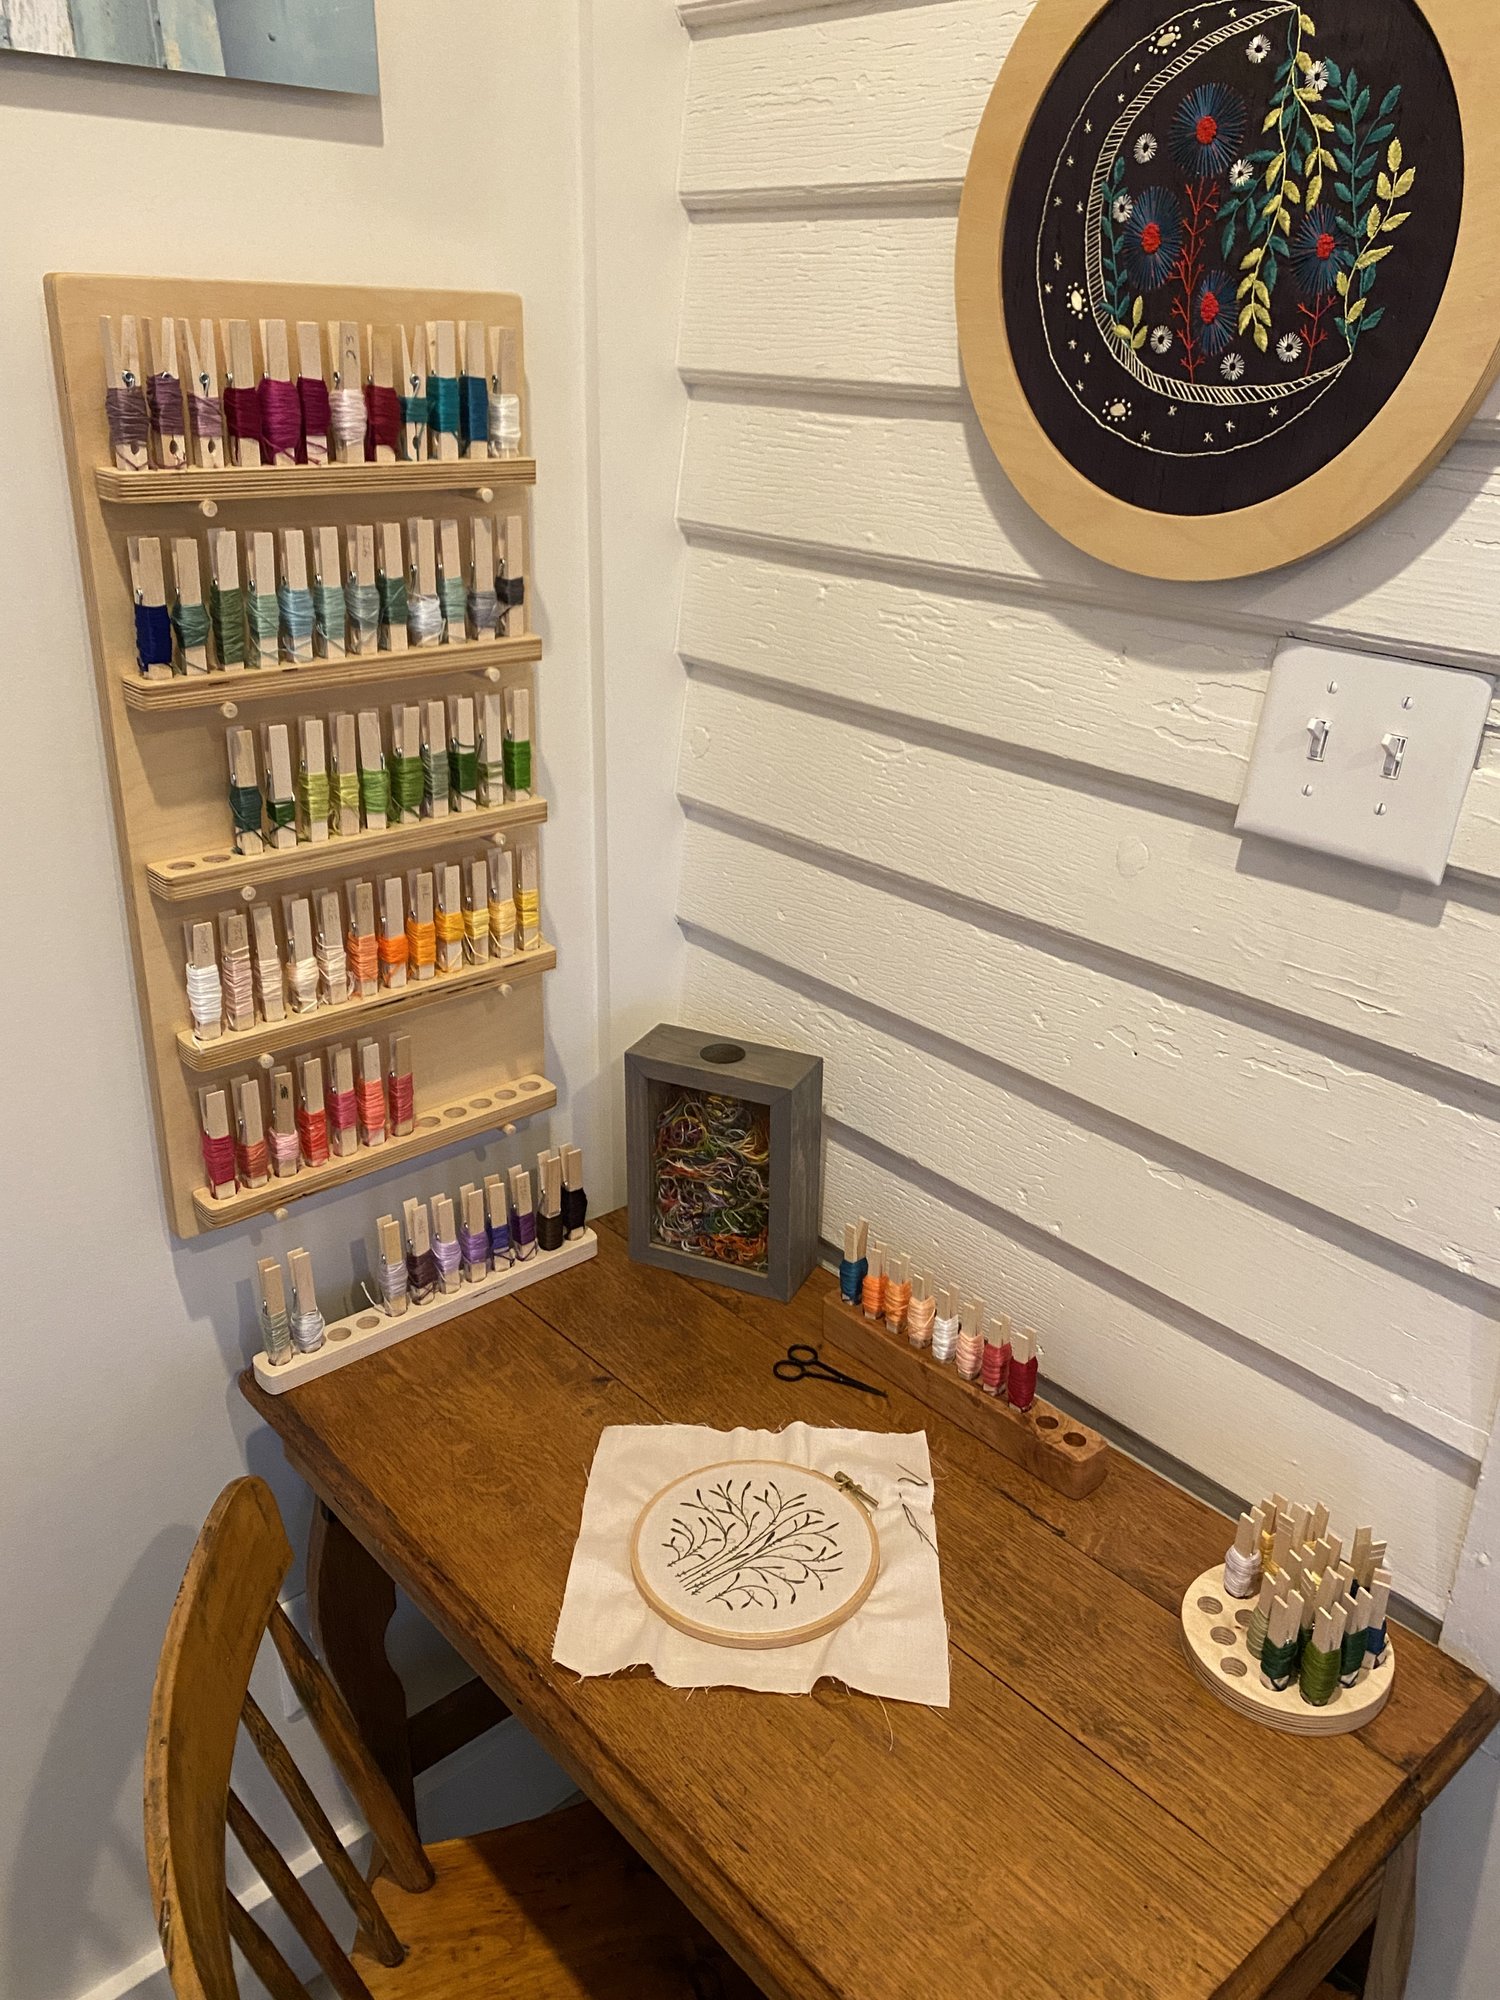 Embroidery Floss Display and Storage Ideas